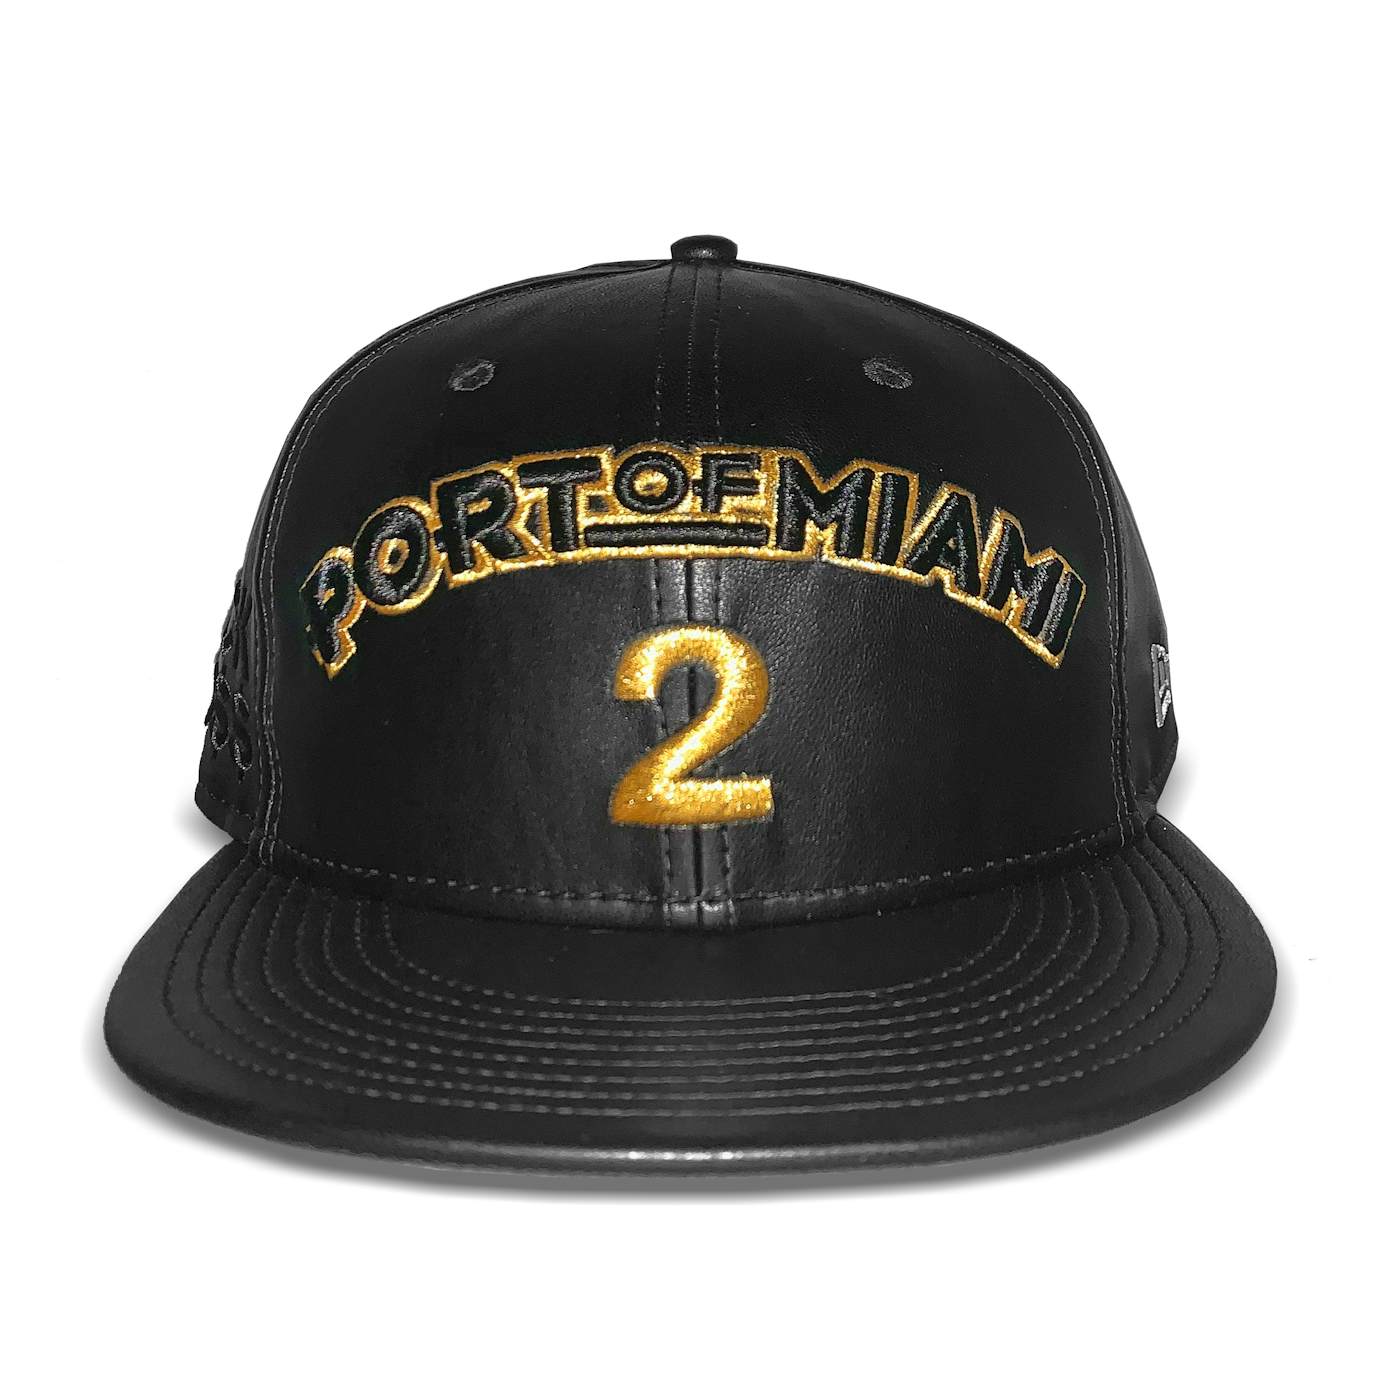 Rick Ross "Port of Miami 2" Limited Edition New Era 9FIFTY Snapback  Hat